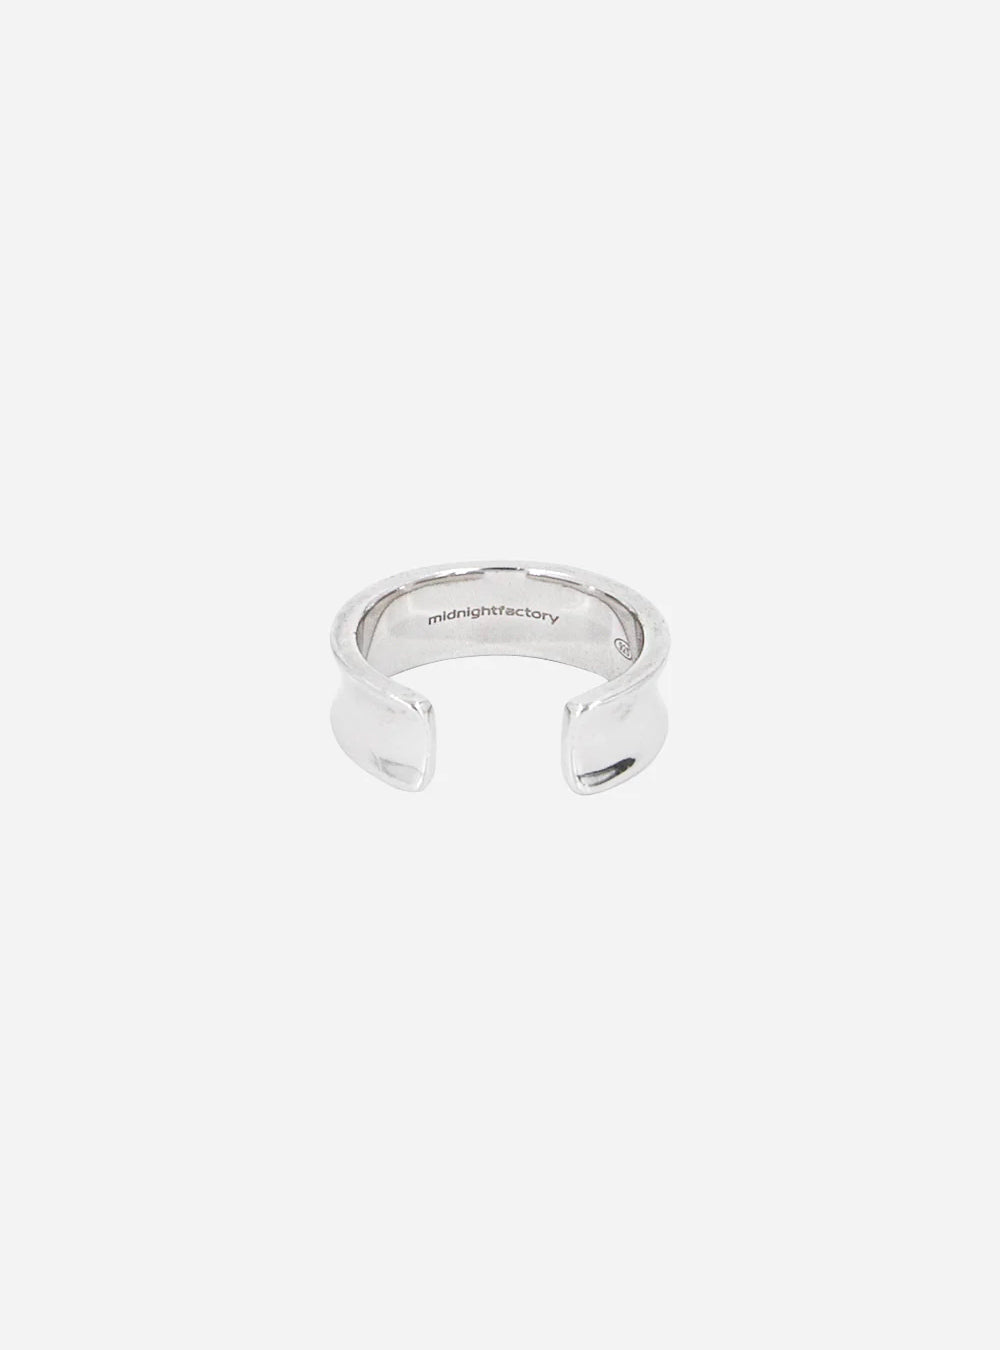 a MIDNIGHTFACTORY HEAVYDUTYKID ring on a white surface.